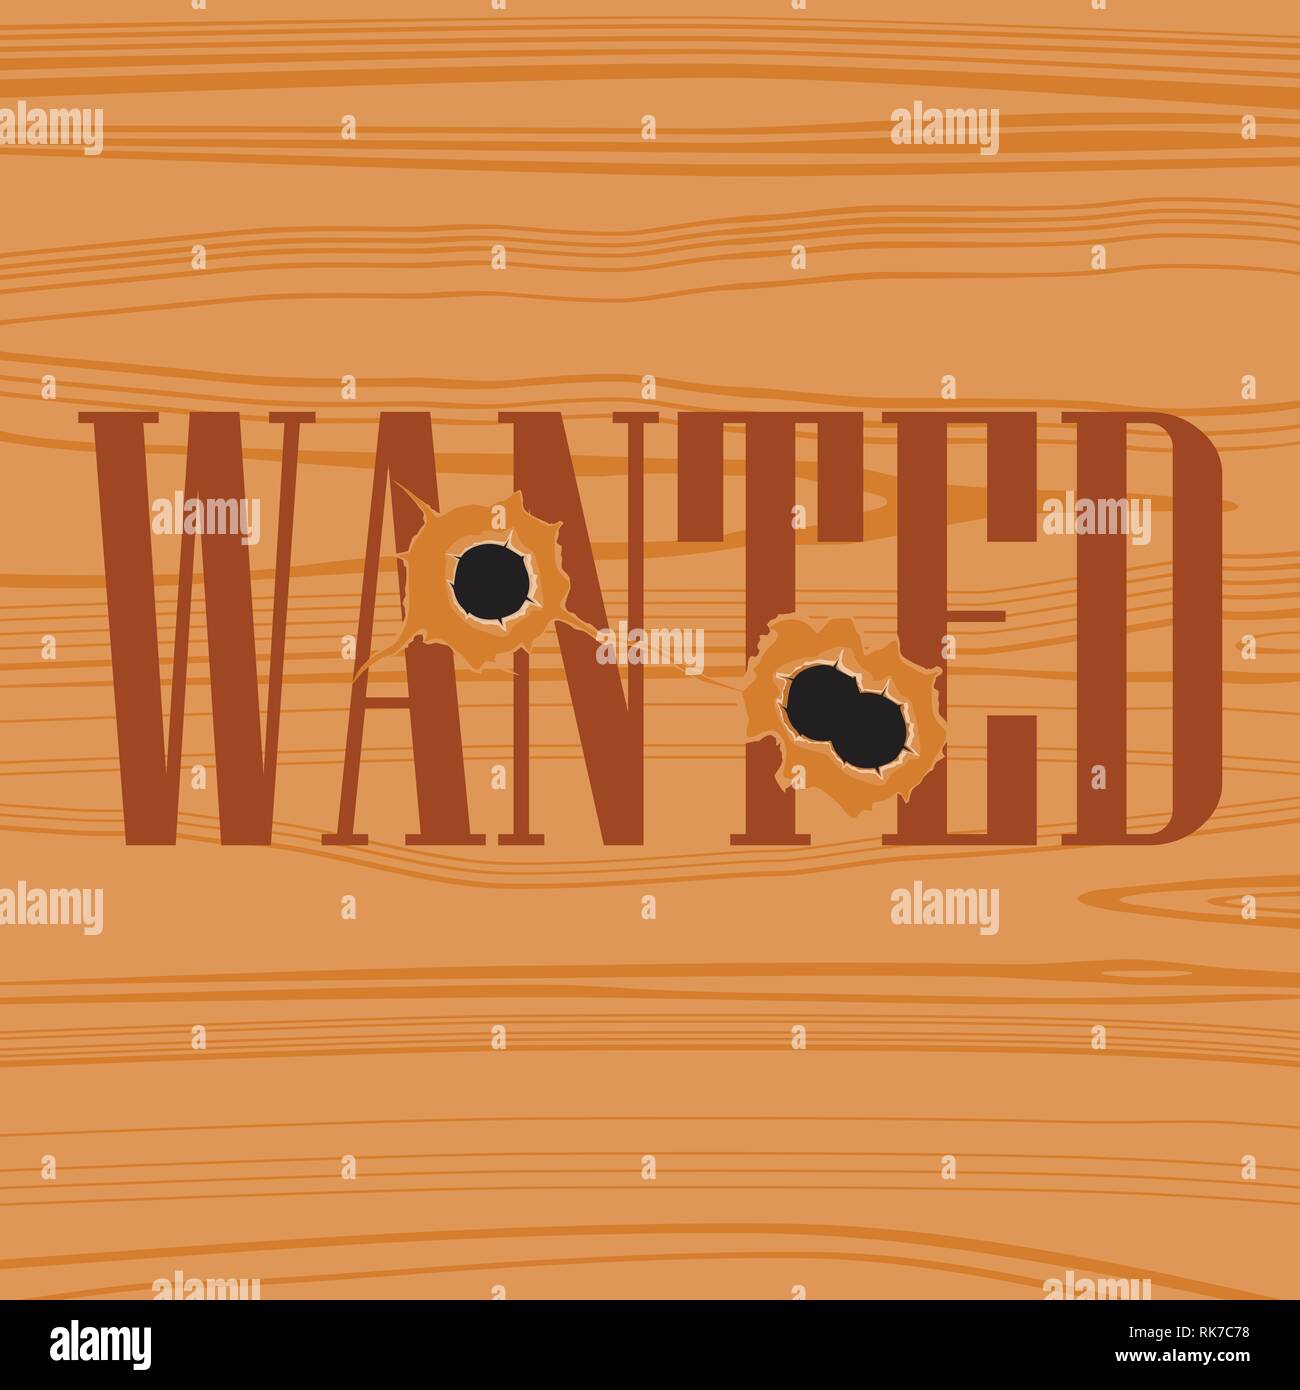 Bullet holes and text wanted banner, wallpaper, poster design. Isolated on wooden background. Vector illustration, eps 10. Stock Vector